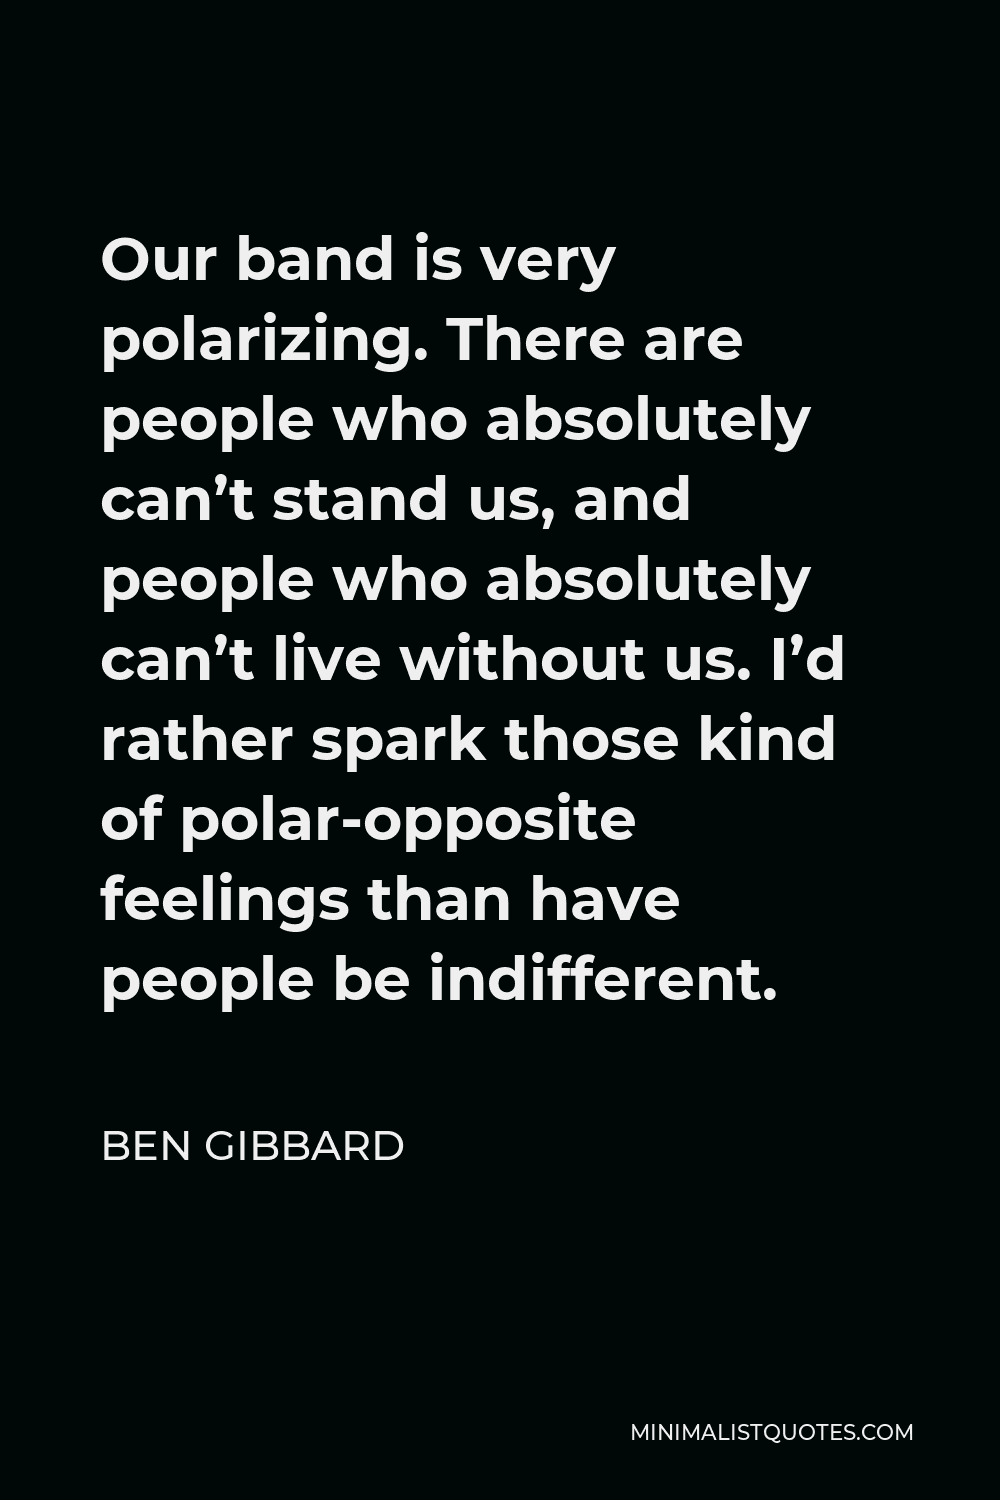 Ben Gibbard Quote - Our band is very polarizing. There are people who absolutely can’t stand us, and people who absolutely can’t live without us. I’d rather spark those kind of polar-opposite feelings than have people be indifferent.